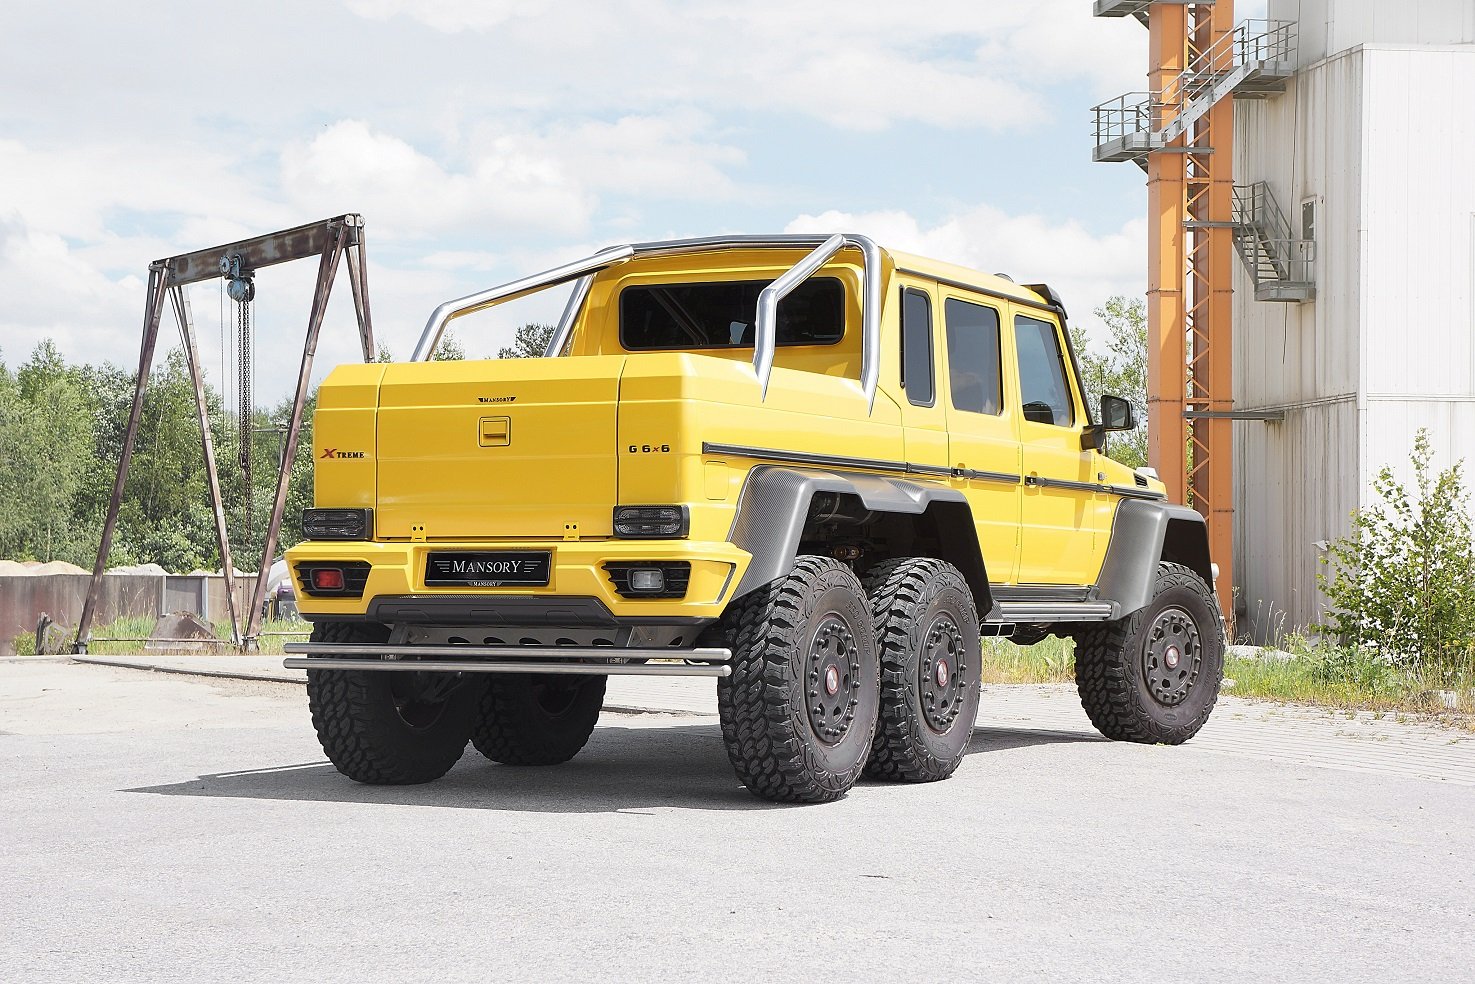 Mansory Mercedes Benz G63 Amg 6x6 All Road Yellow Modified Wallpapers Hd Desktop And Mobile Backgrounds